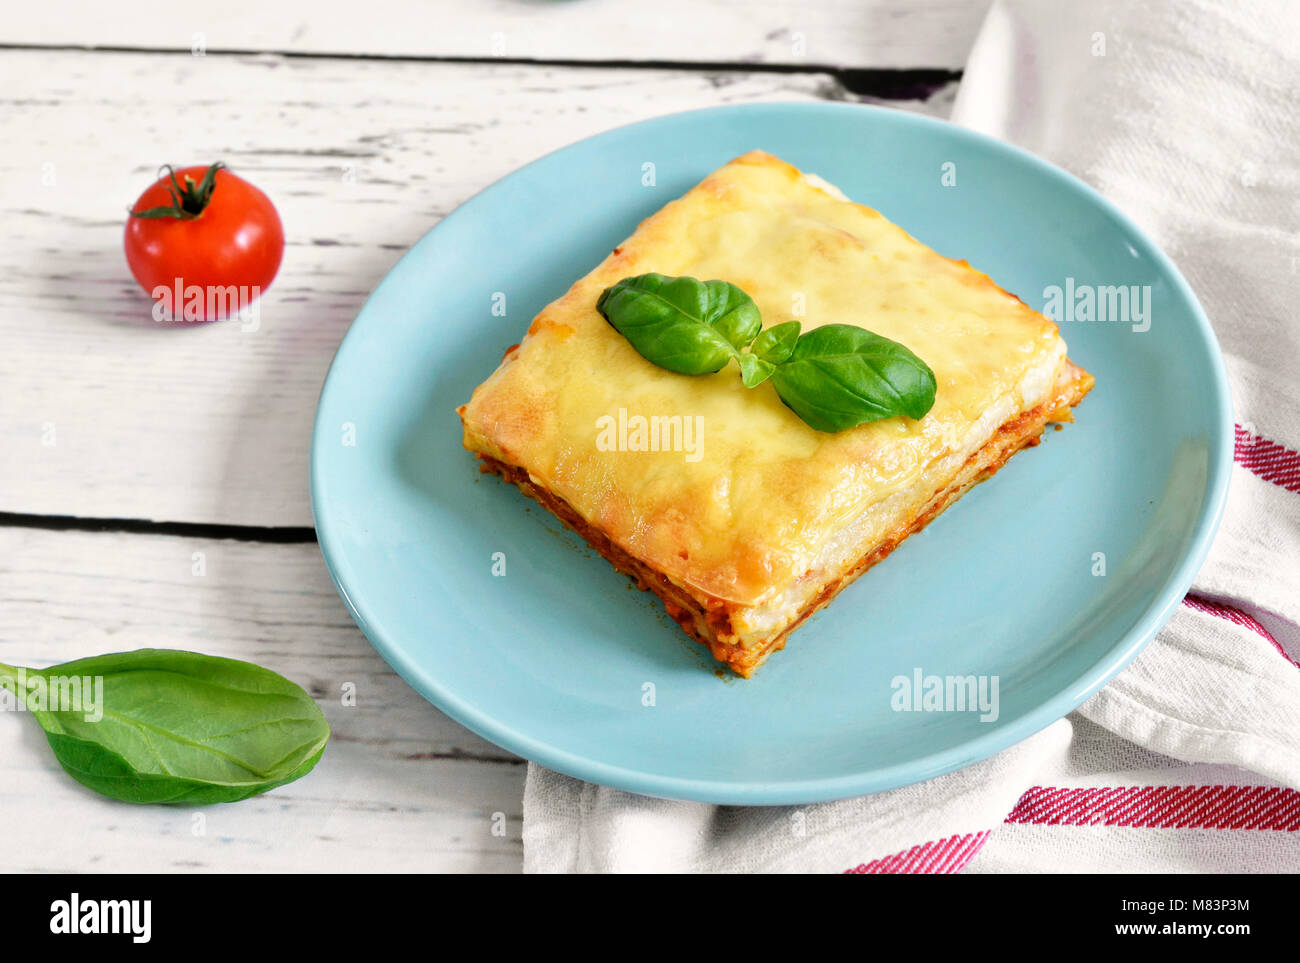 Fresh meat lasagne, lasagne bolognese, pasta dish on a wooden table with decorative basil leaf. Italian cuisine. Stock Photo